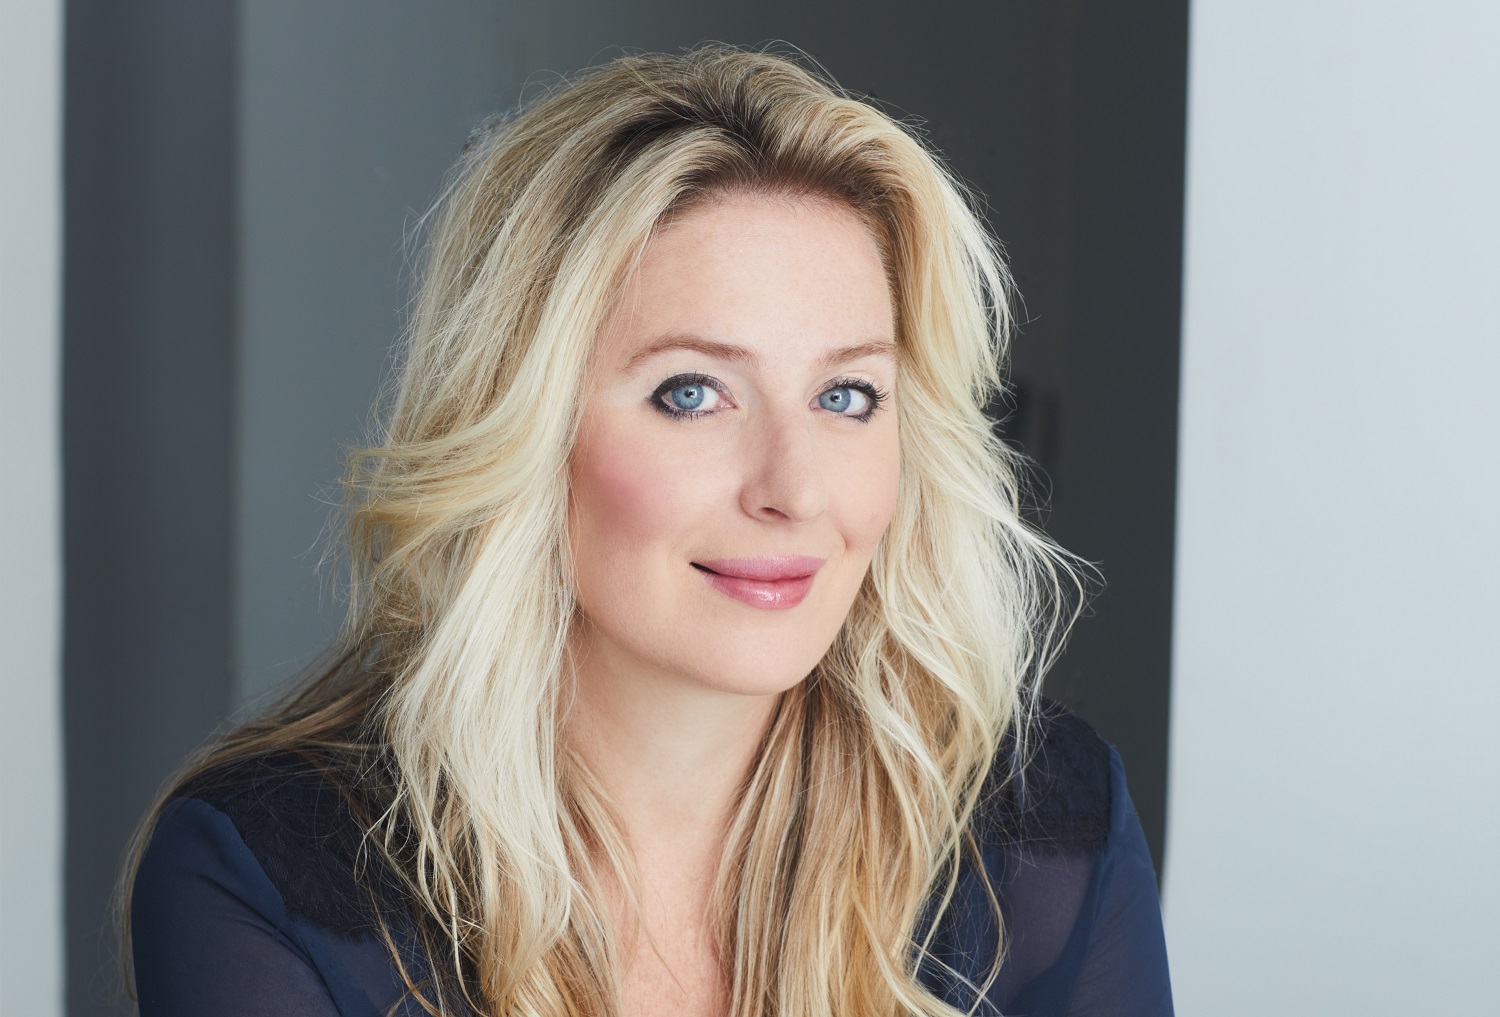 Match Group Announce Melissa Hobley As New Tinder CMO